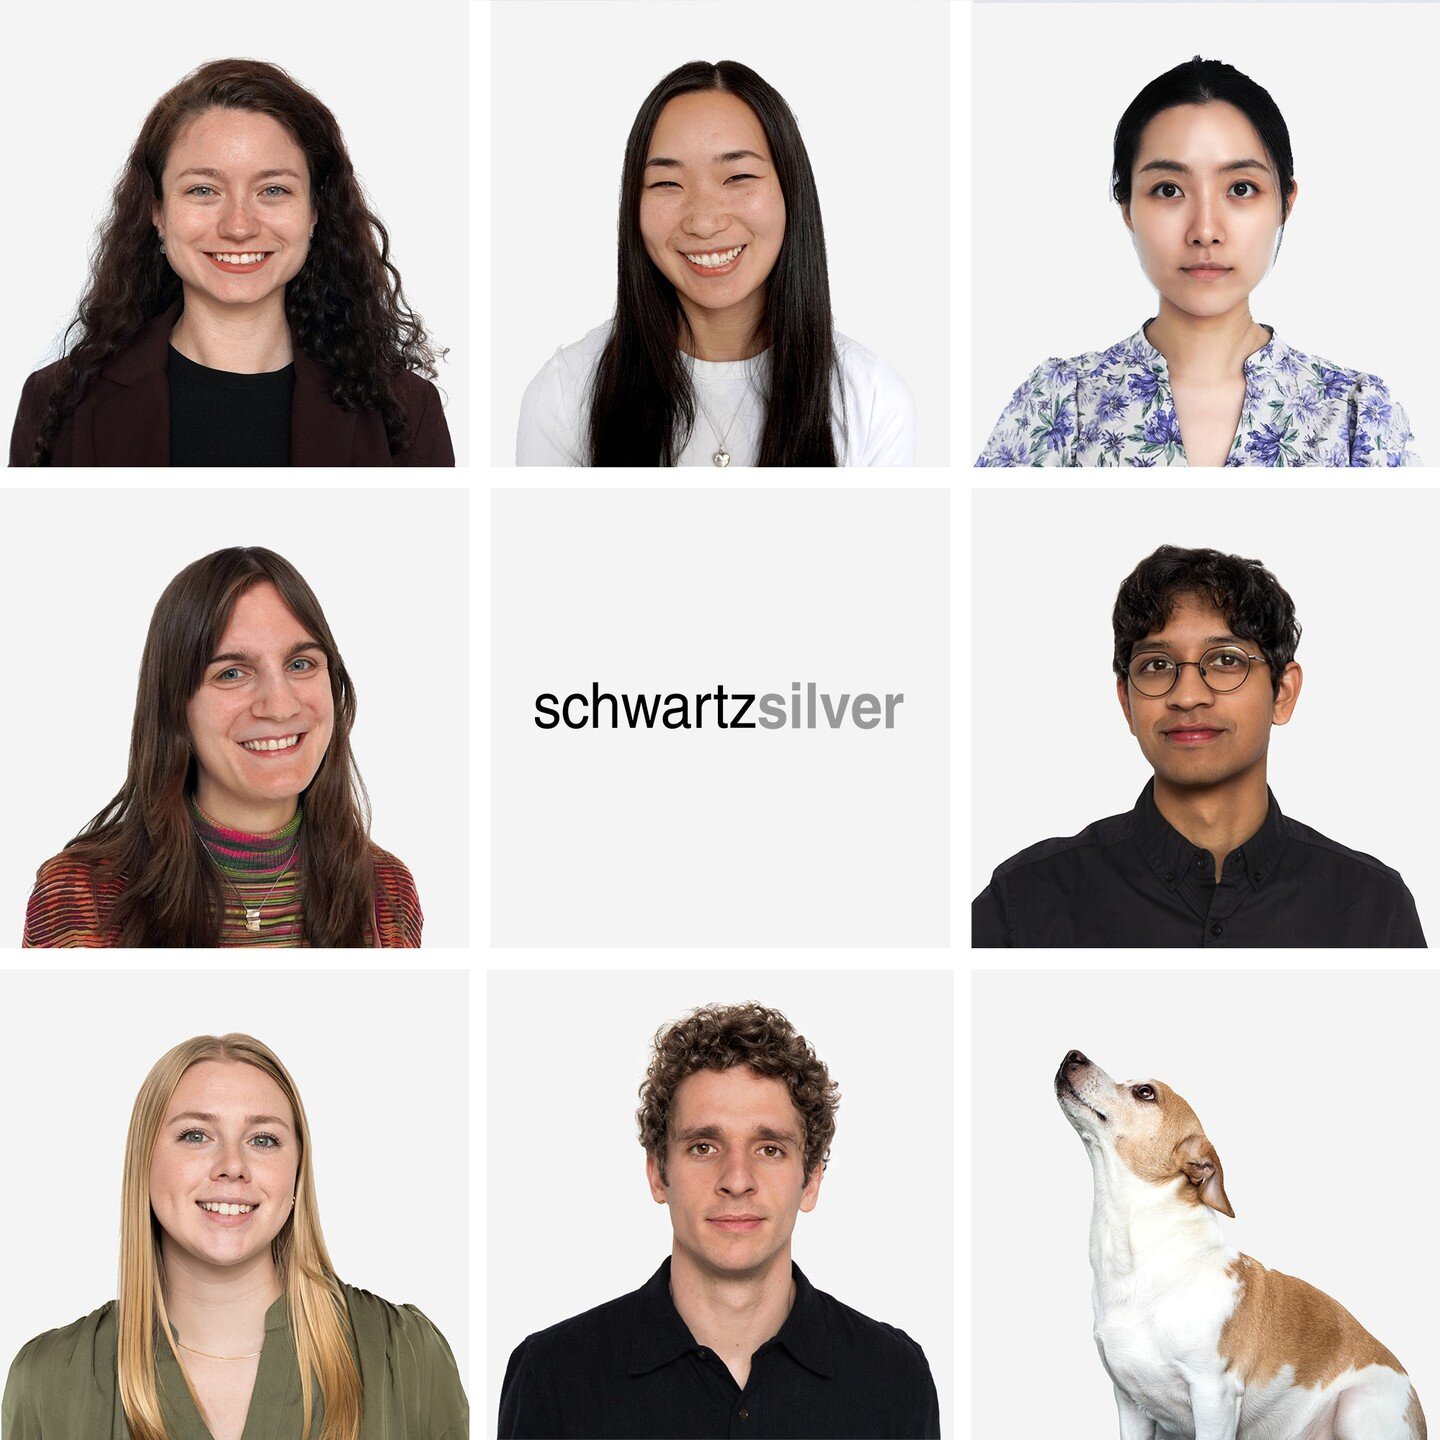 We are proud to introduce seven new designers to our growing firm. We welcome: Ashley Dotson, Hannah Wang (AIA), Vera Xie, Sofia Kuspan, Praveen Menon, Kyle Winston, Chantal DeVlugt, and Federico (Freddie).